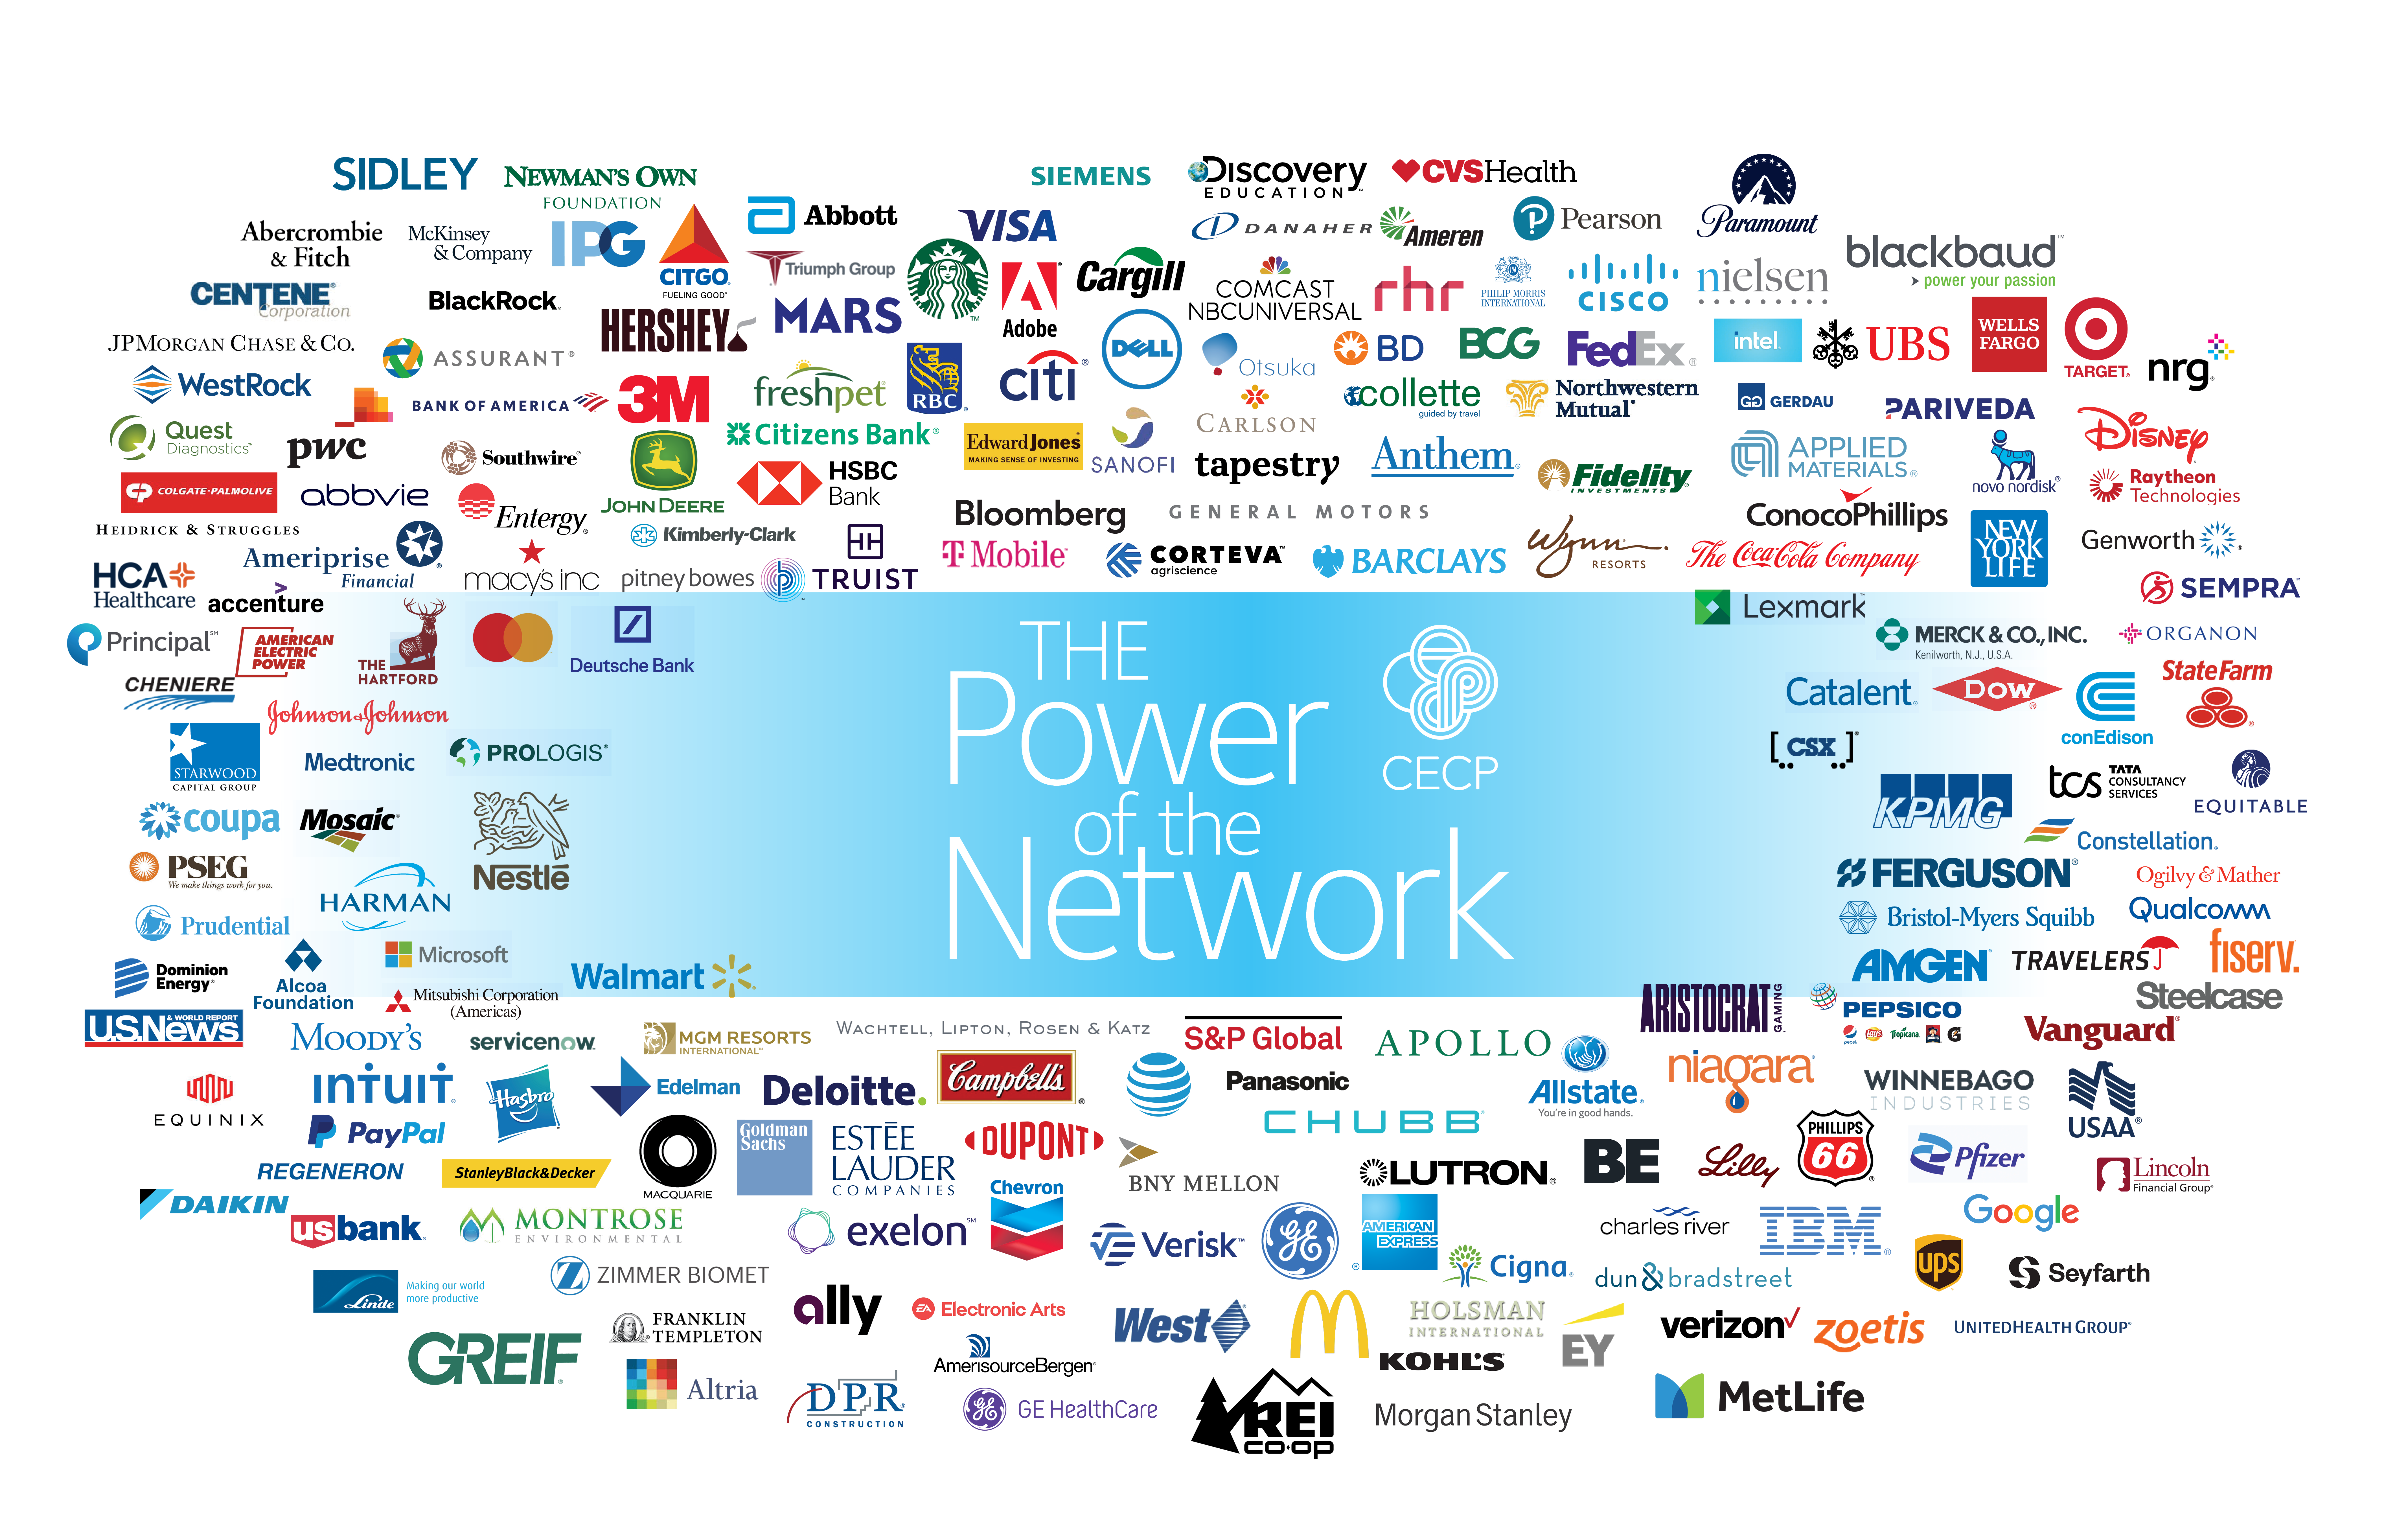 The Power of the Network: CECP